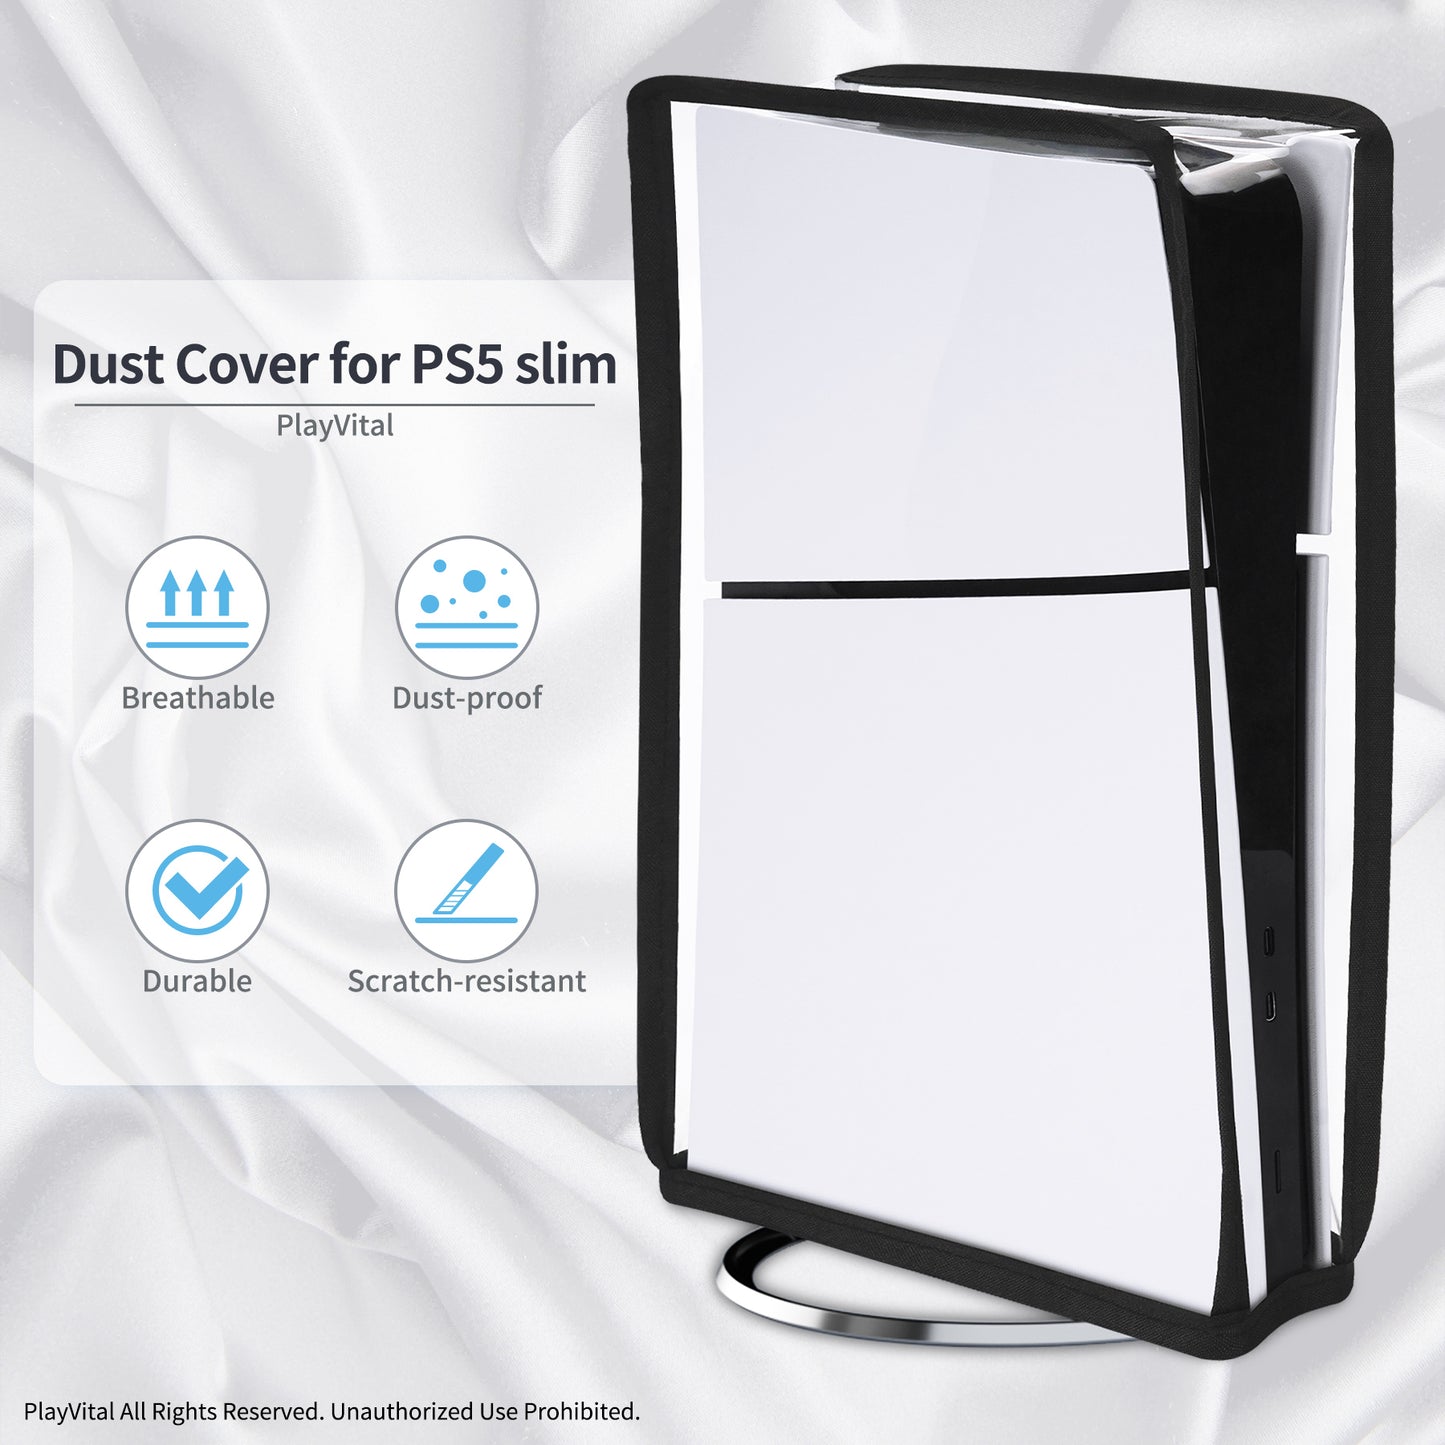 PlayVital Vertical Dust Cover for ps5 Slim Digital Edition(The New Smaller Design), Transparent Dust Proof Protector Waterproof Cover Sleeve for ps5 Slim Console - JKSPFM003 PlayVital